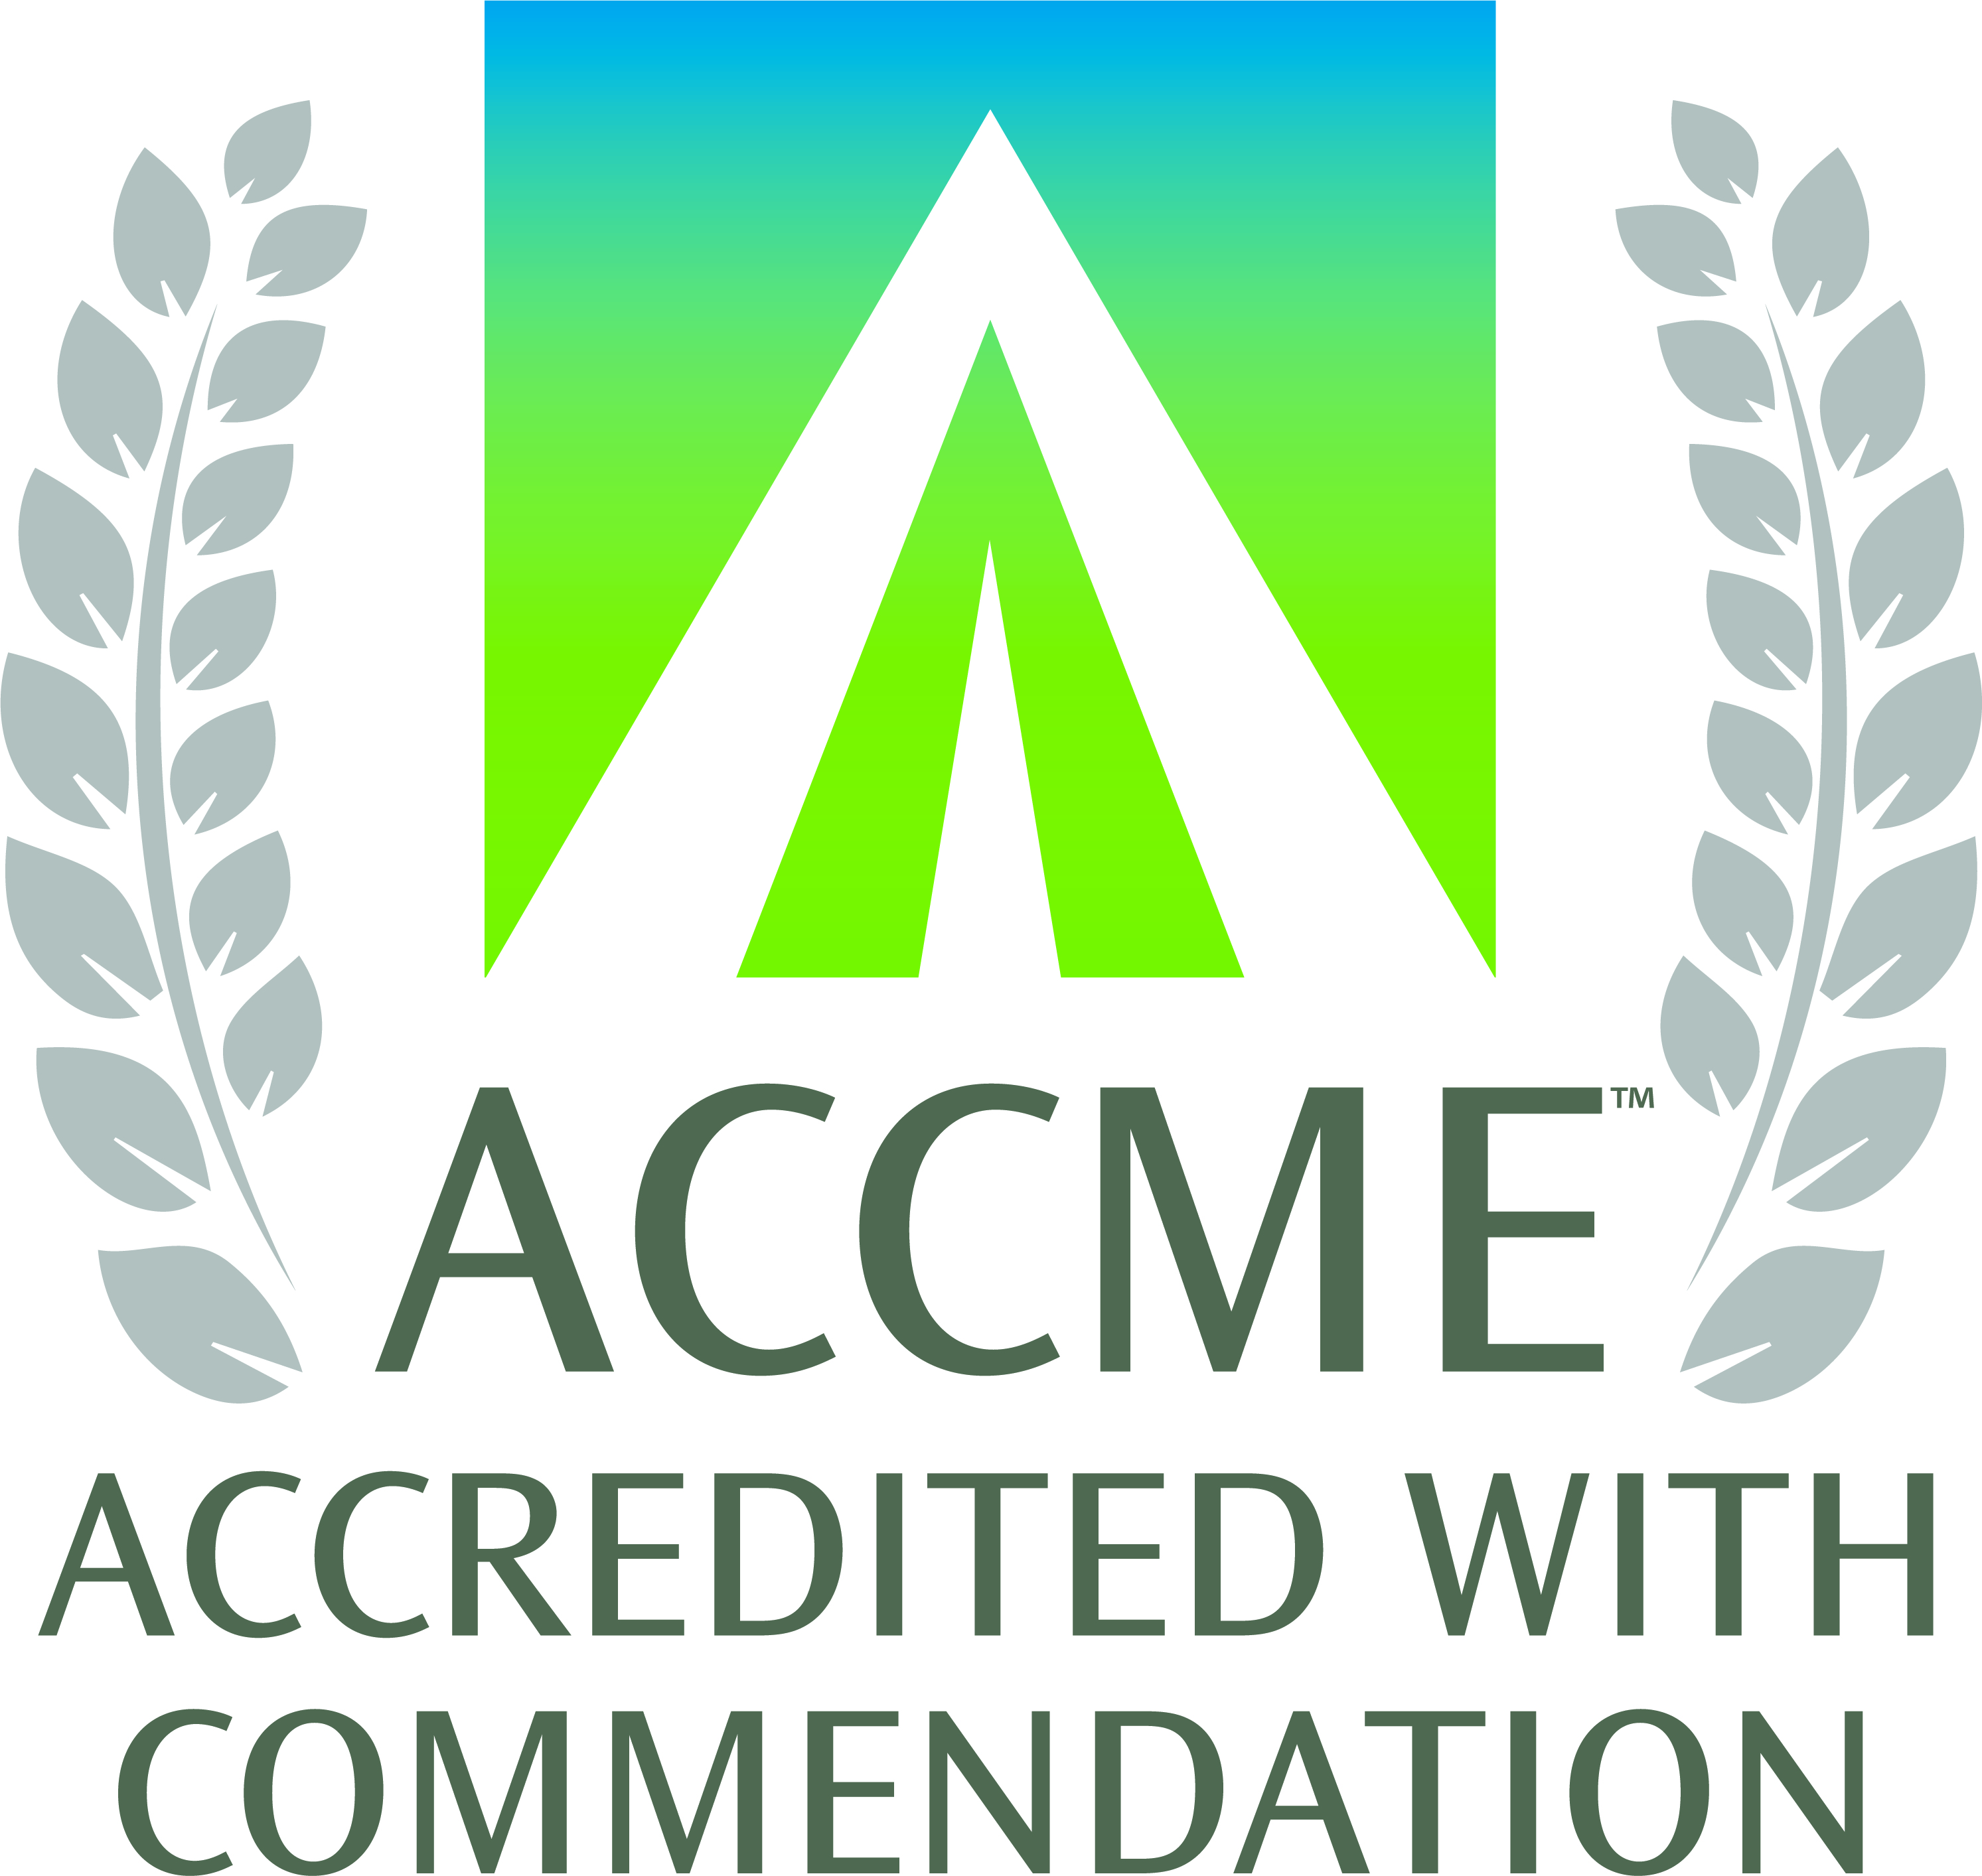 Accreditation with Commendation